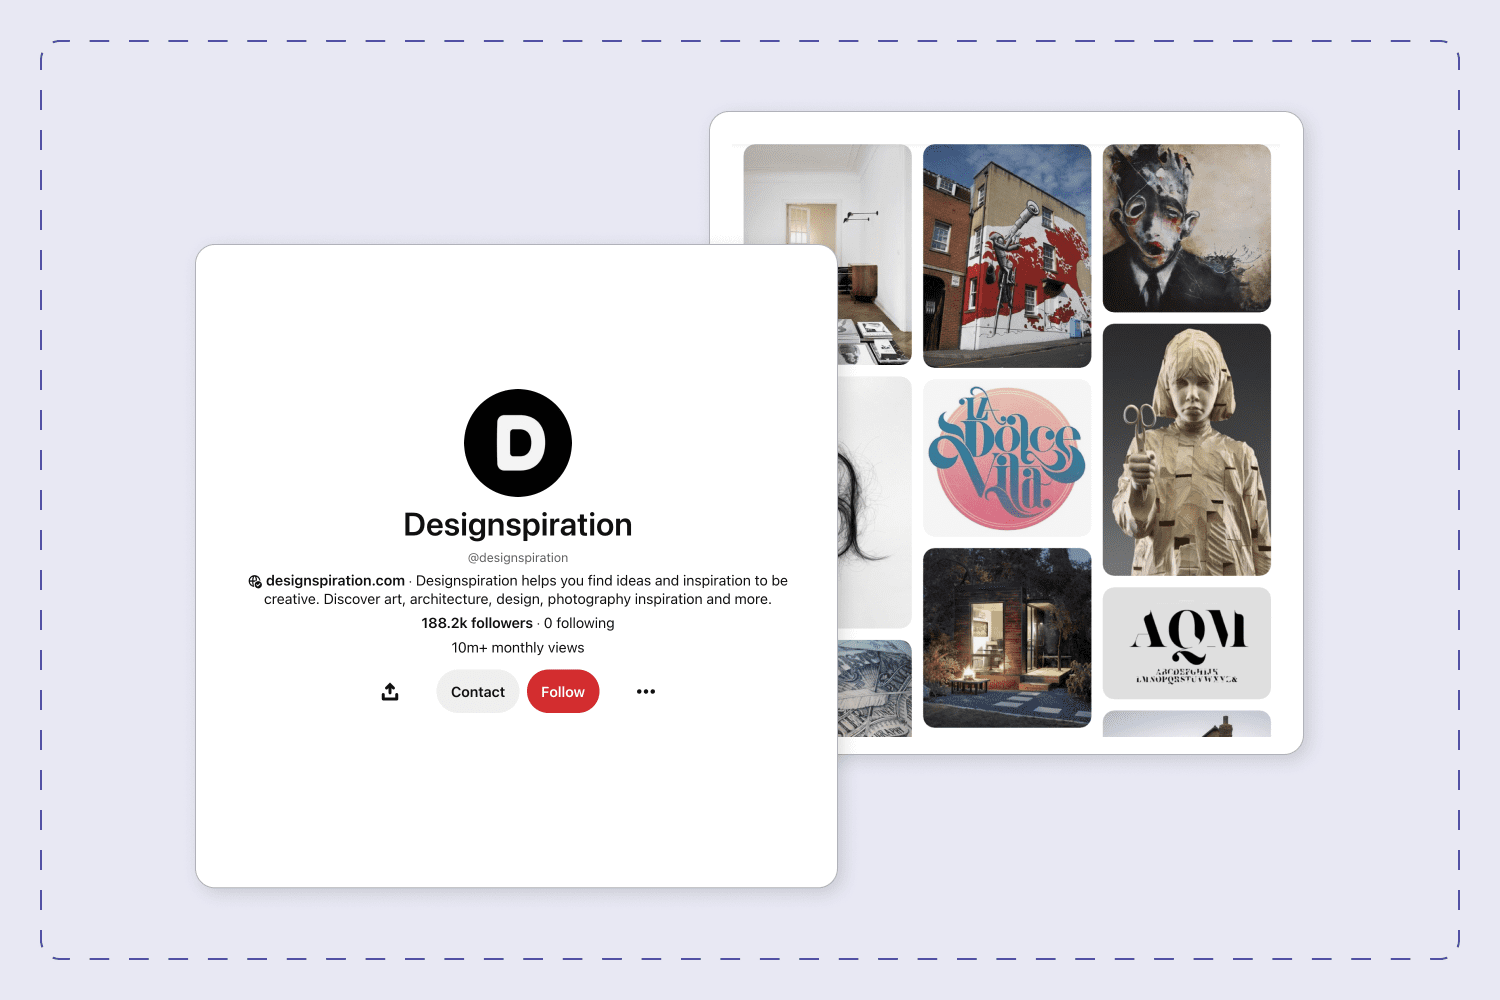 Collage of Designspiration account pages on Pinterest.